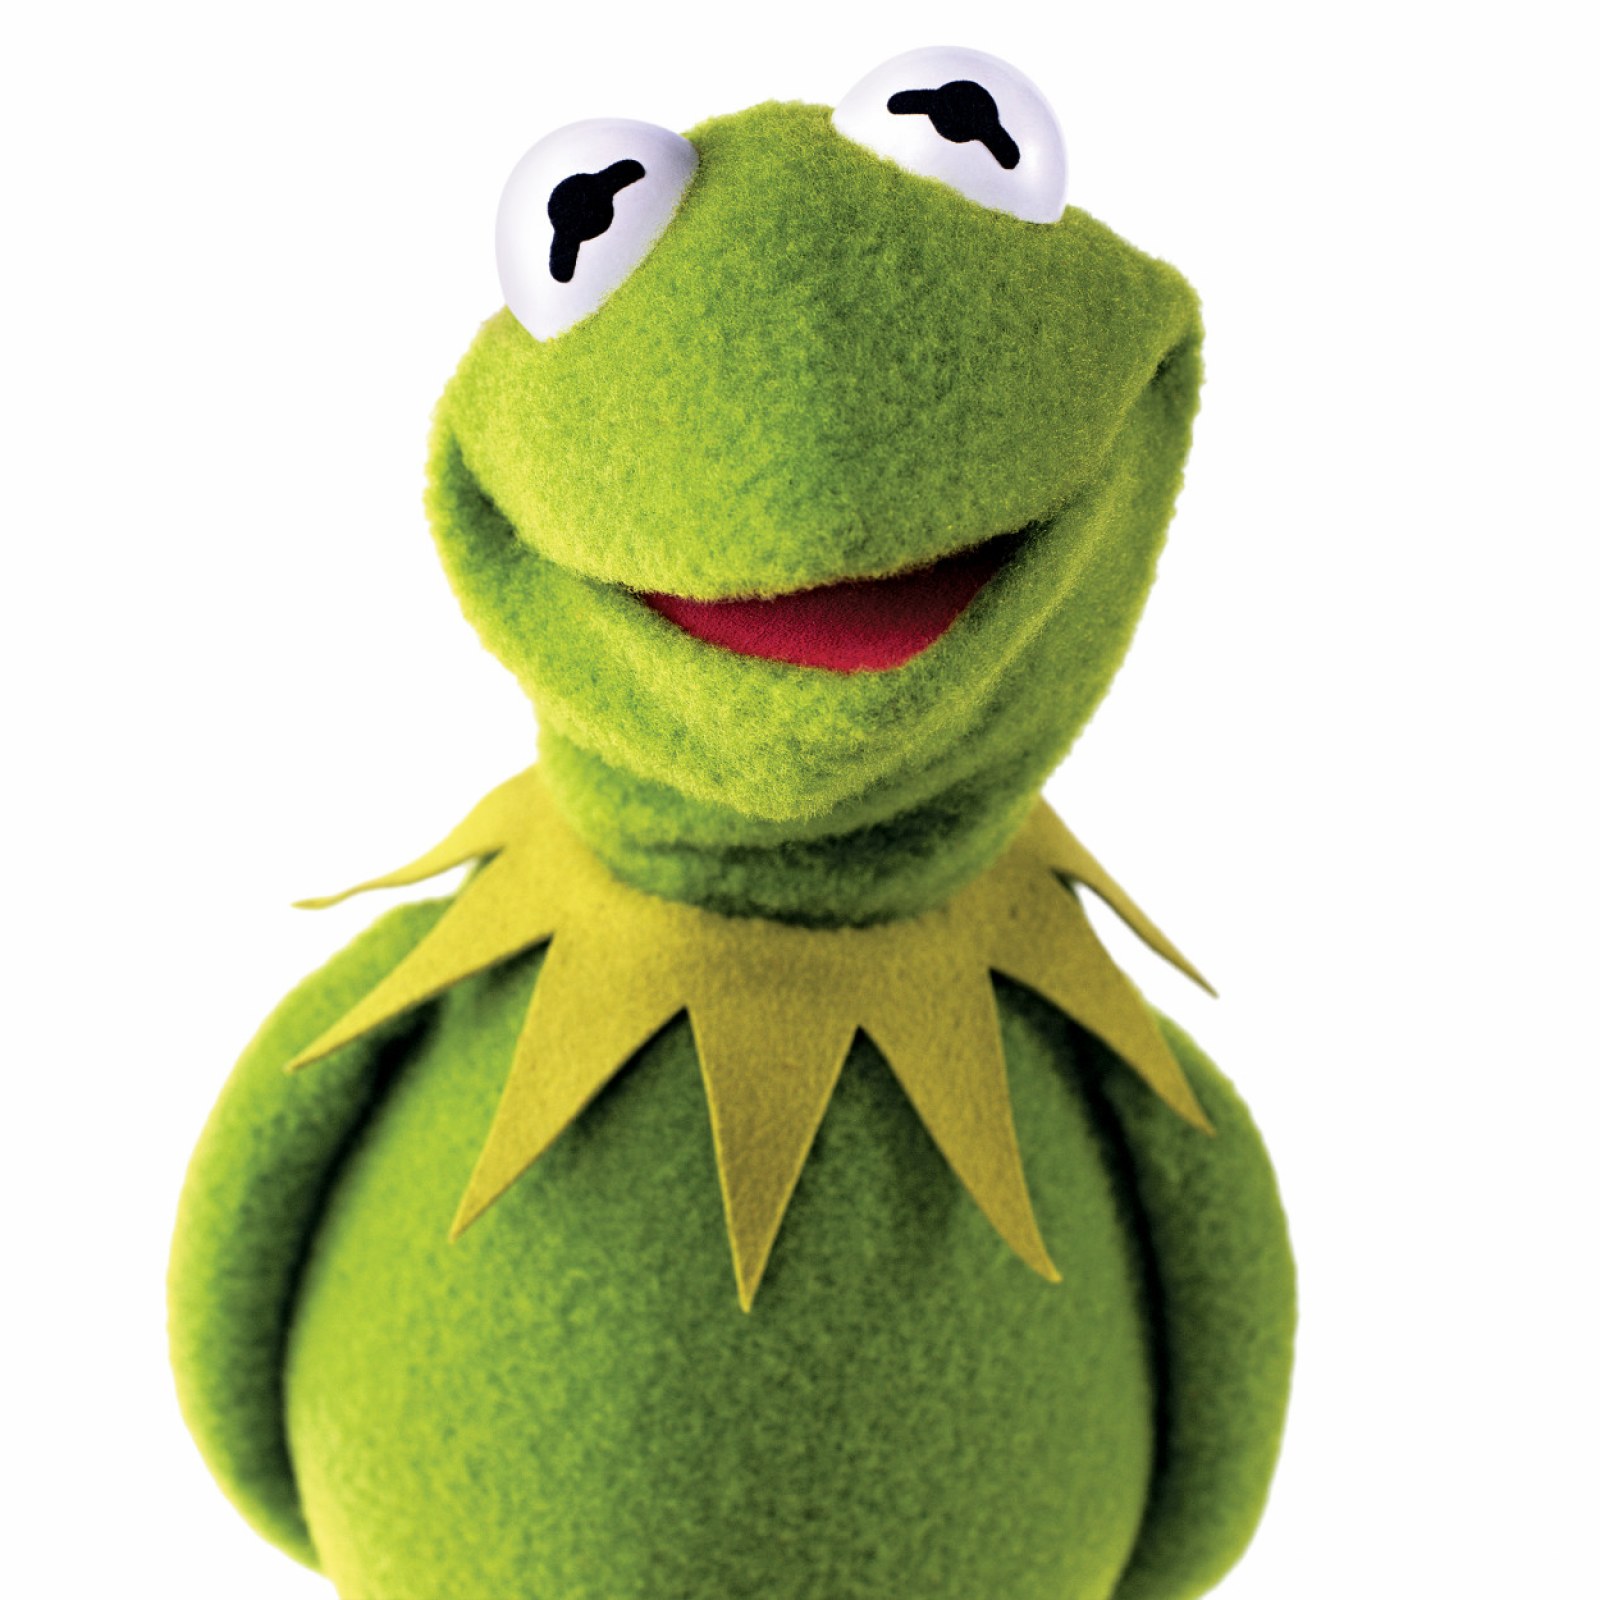 Kermit the Frog and Miss Piggy on Their New Disney+ Show 'Muppets Now'